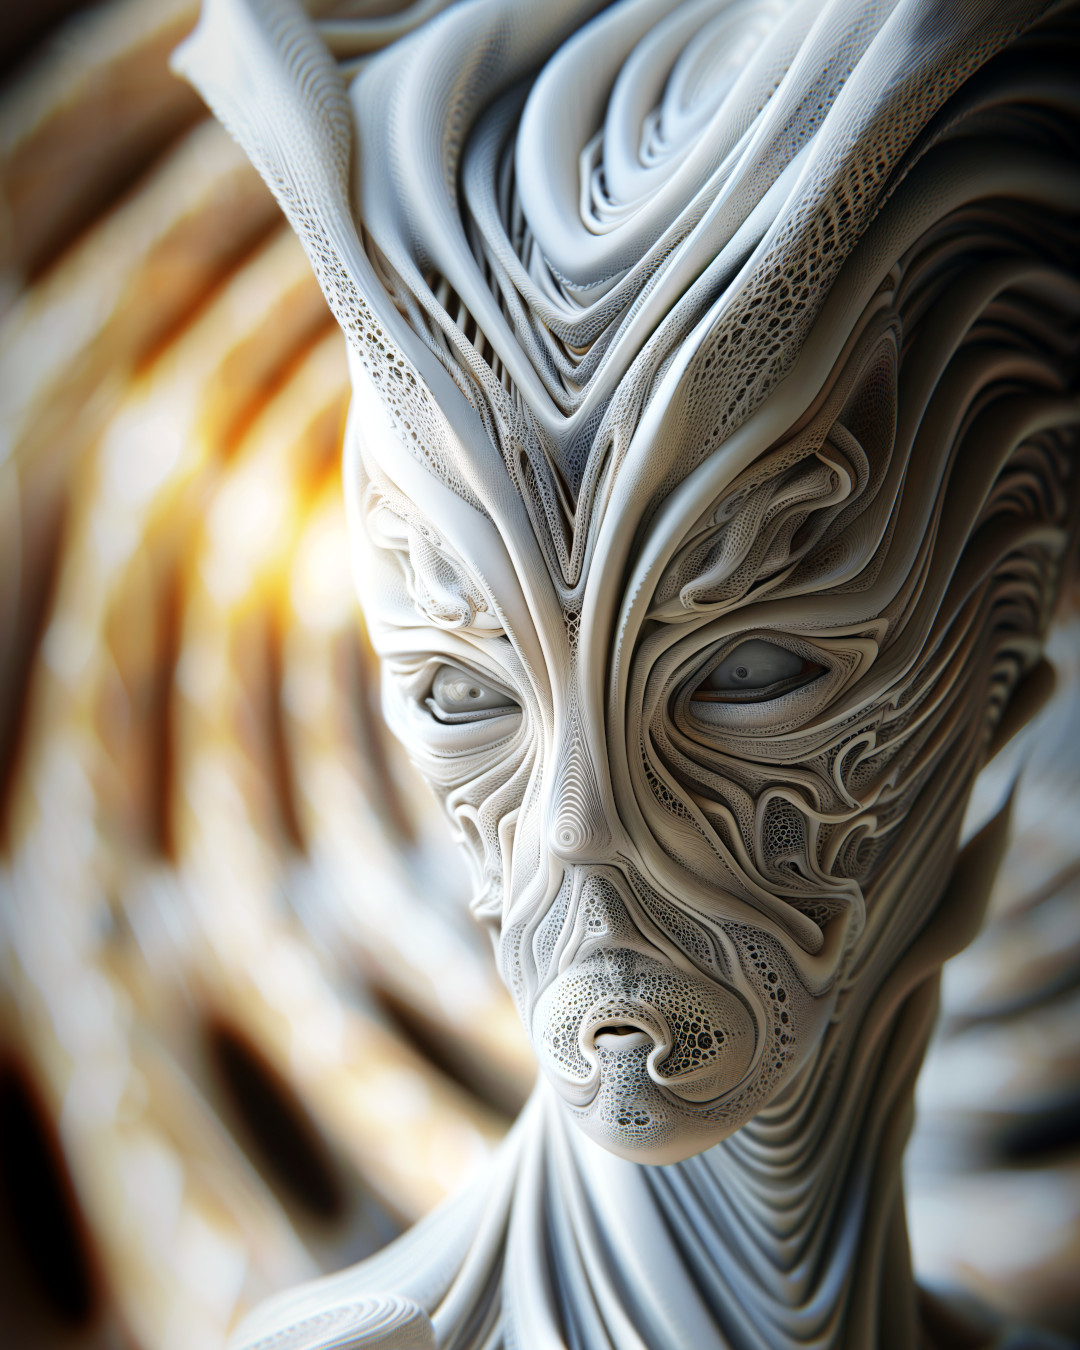 Extraterrestrial creature, layered skin with intricate details, closeup shot